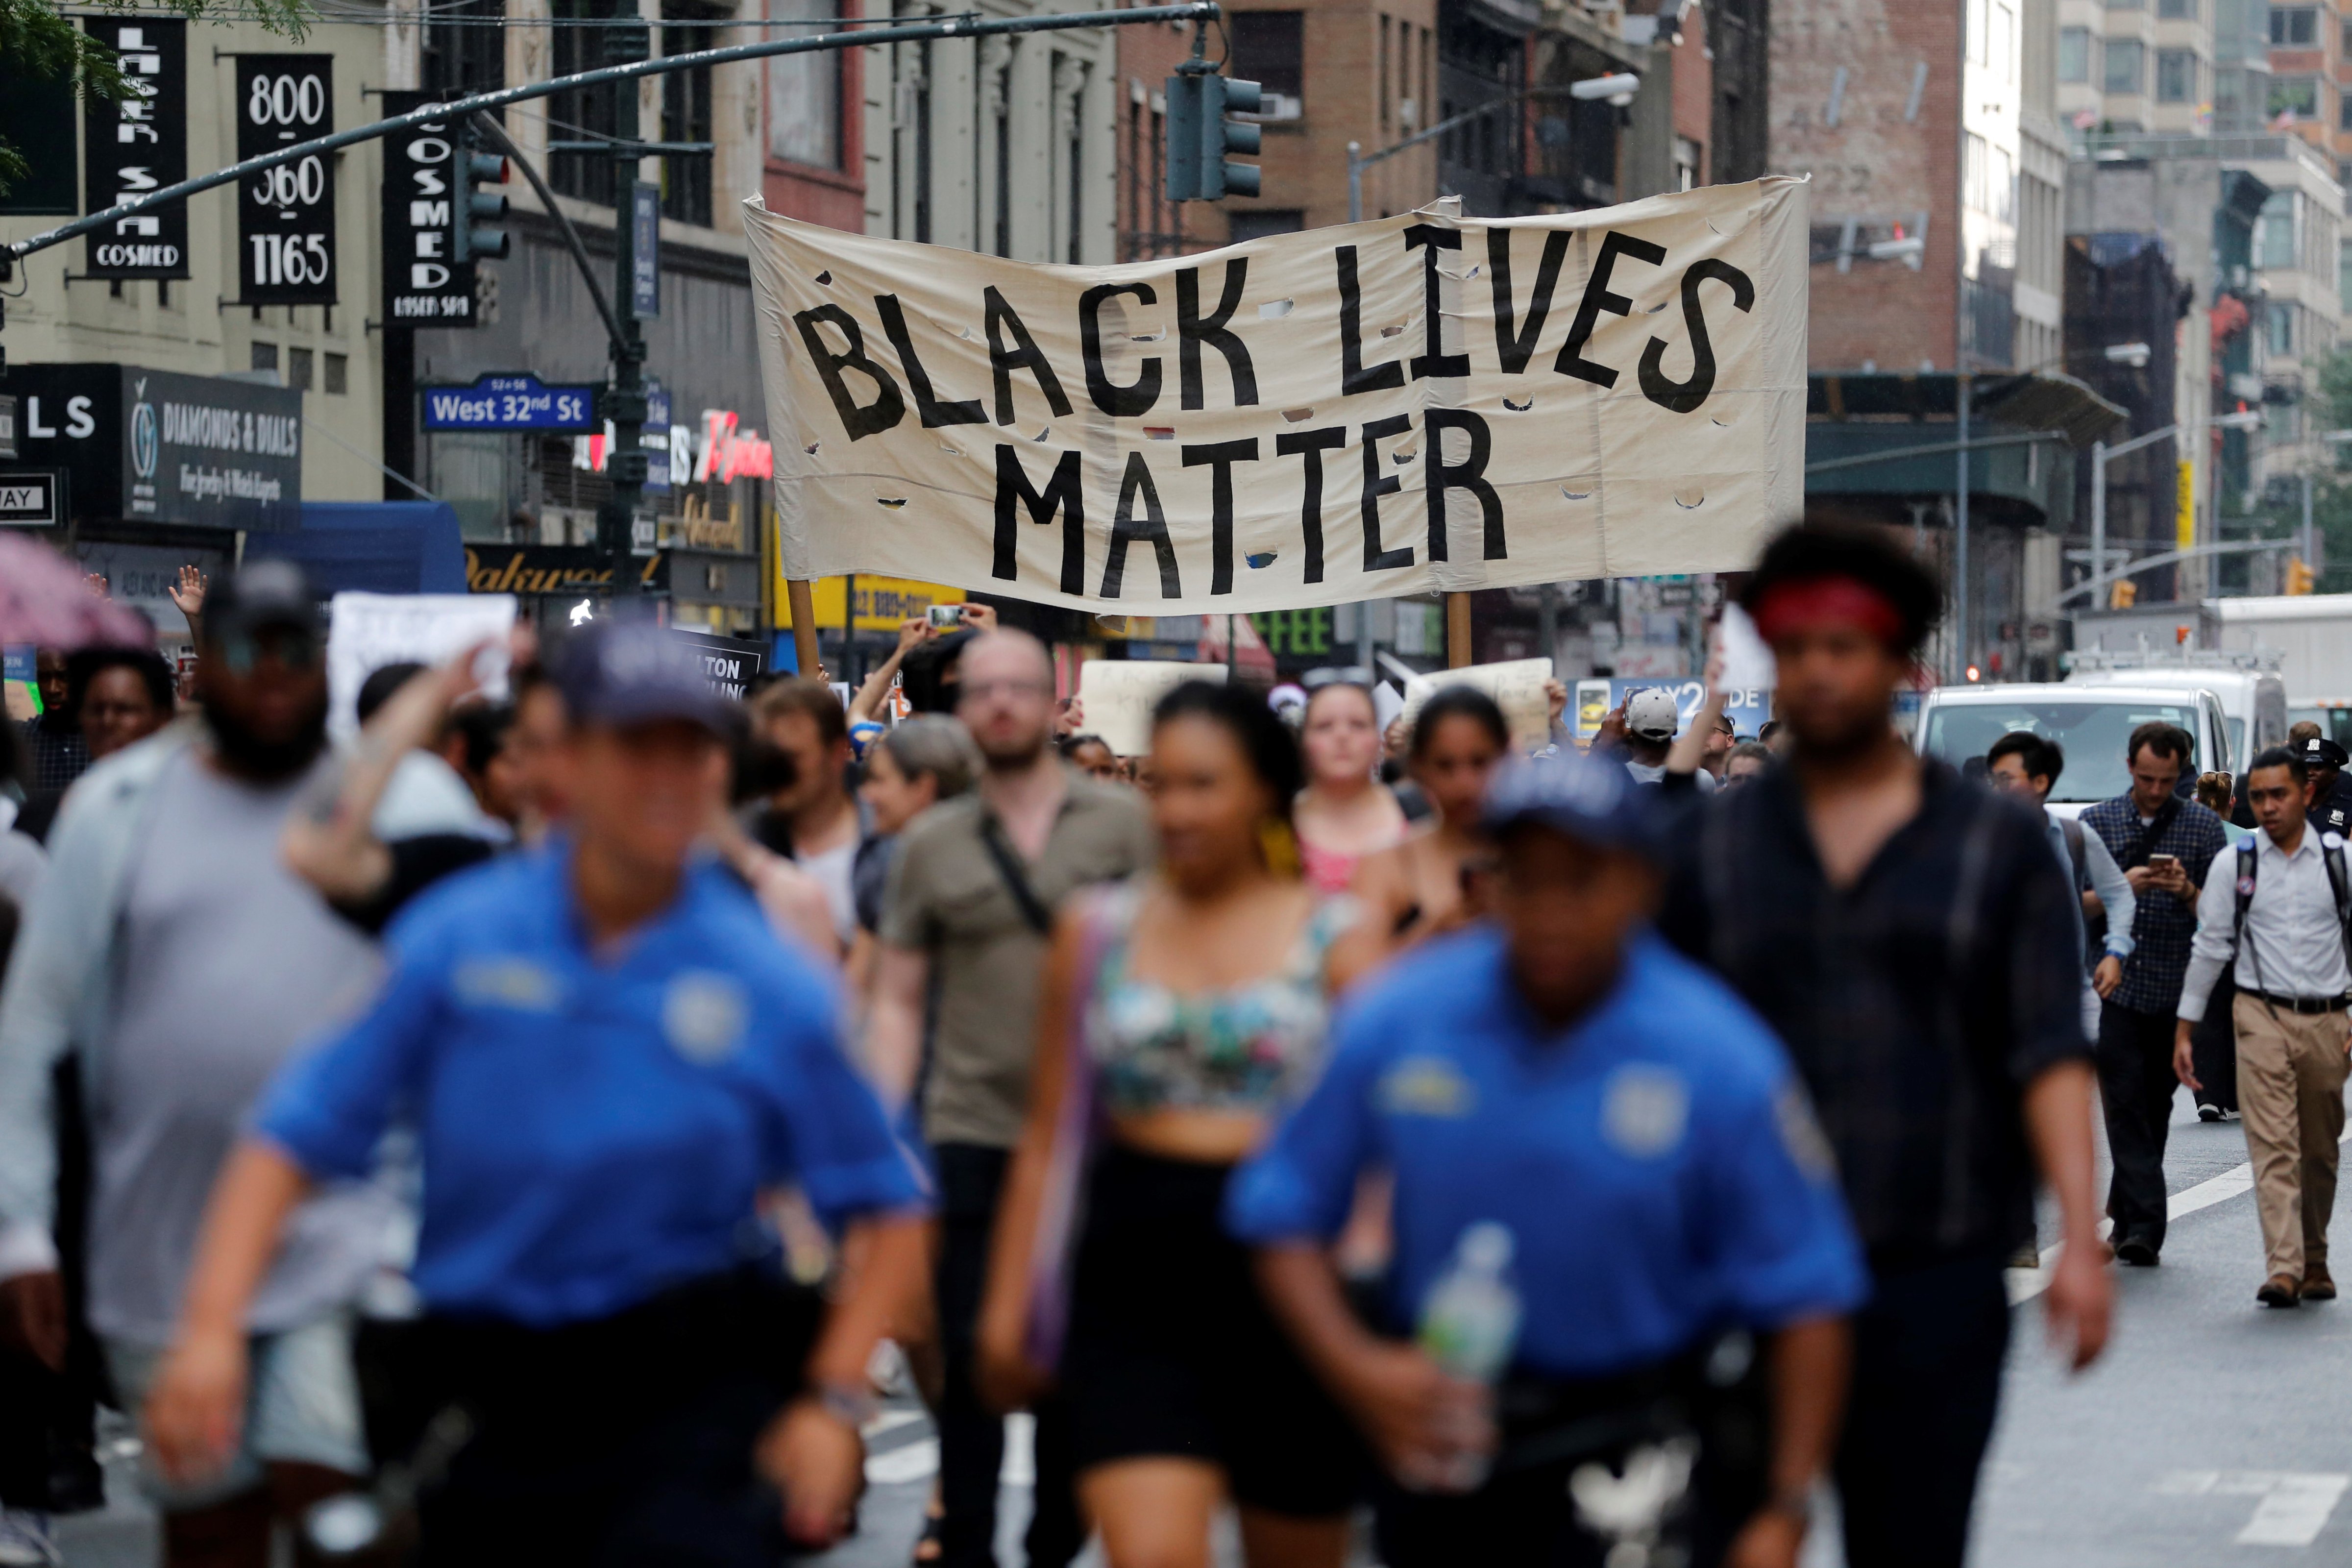 Hundreds gather in Manhattan on July 7 to protest recent police-related shootings